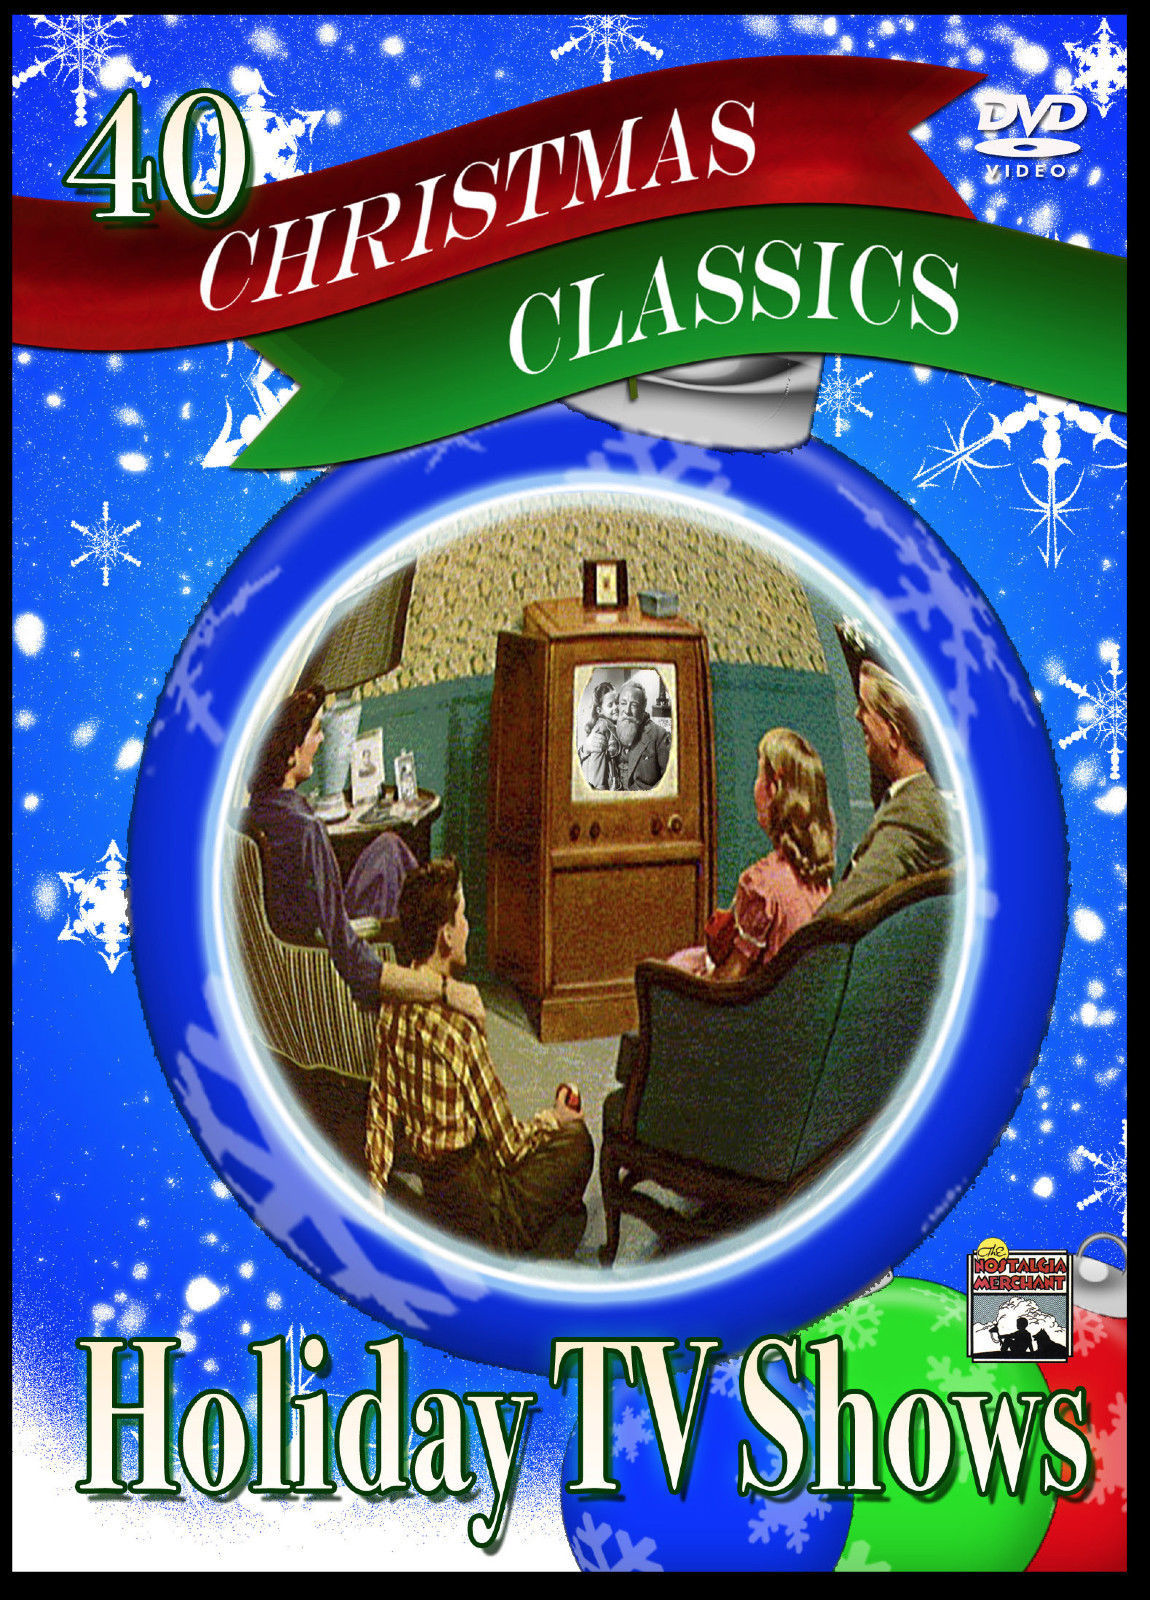 Christmas Classics Holiday TV Shows DVD DVDs & Bluray Discs